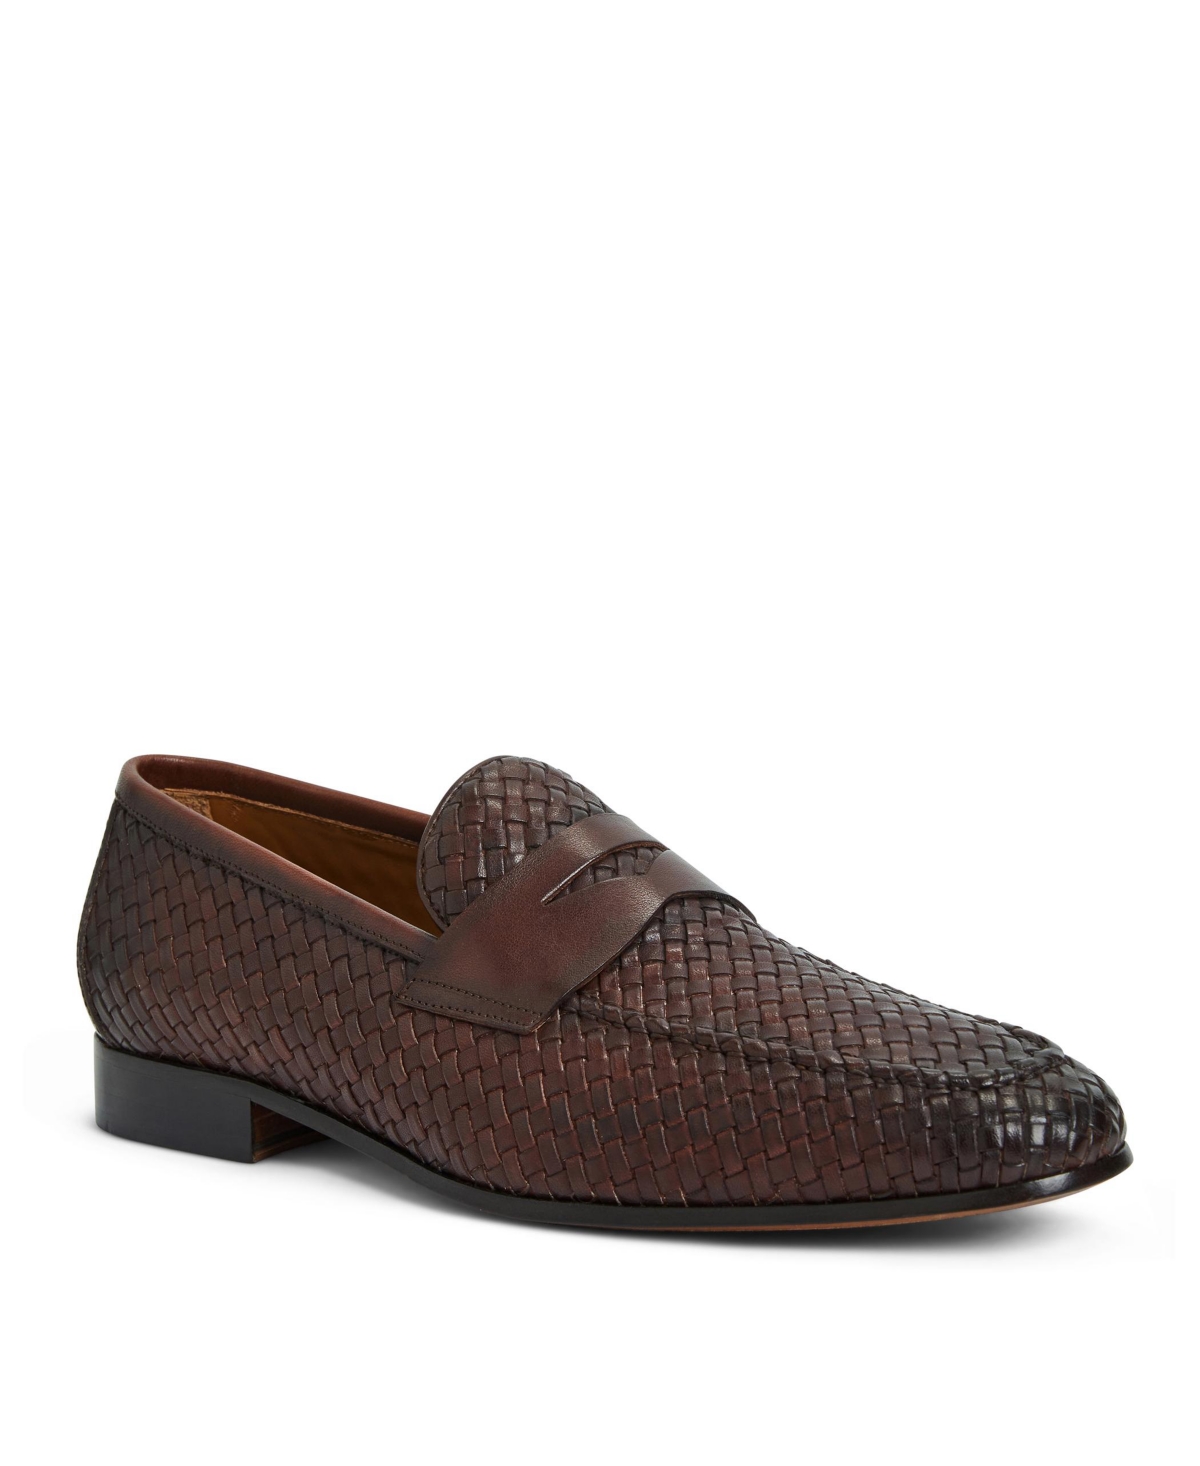 Shop Bruno Magli Men's Manfredo Woven Leather Penny Loafers In Brown Woven